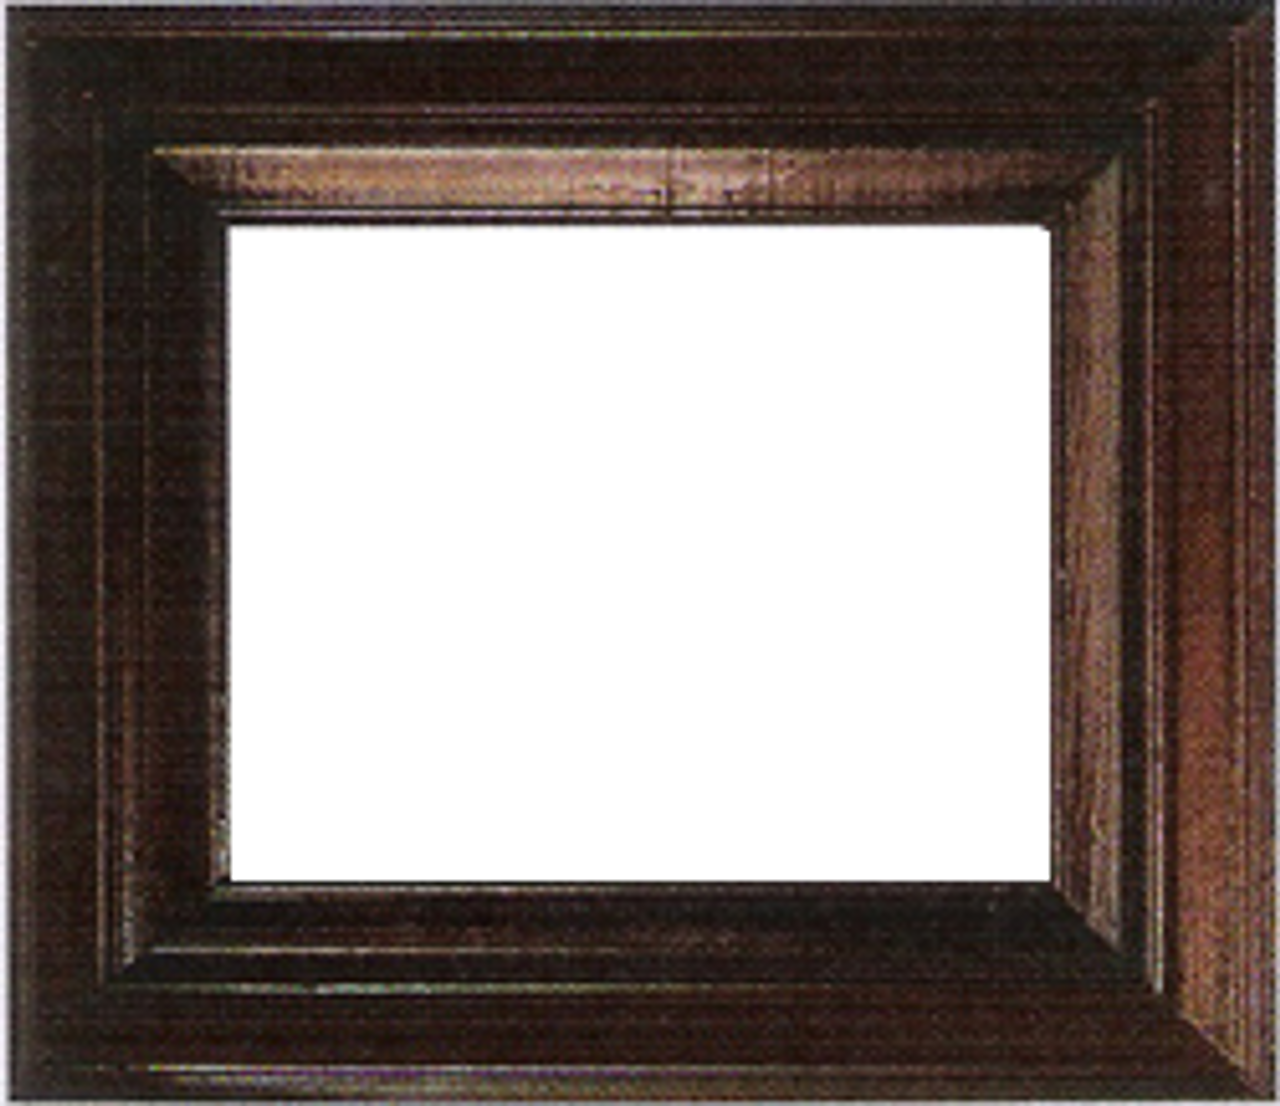 3 Inch Econo Wood Frames With Wood Liners: 19X25*